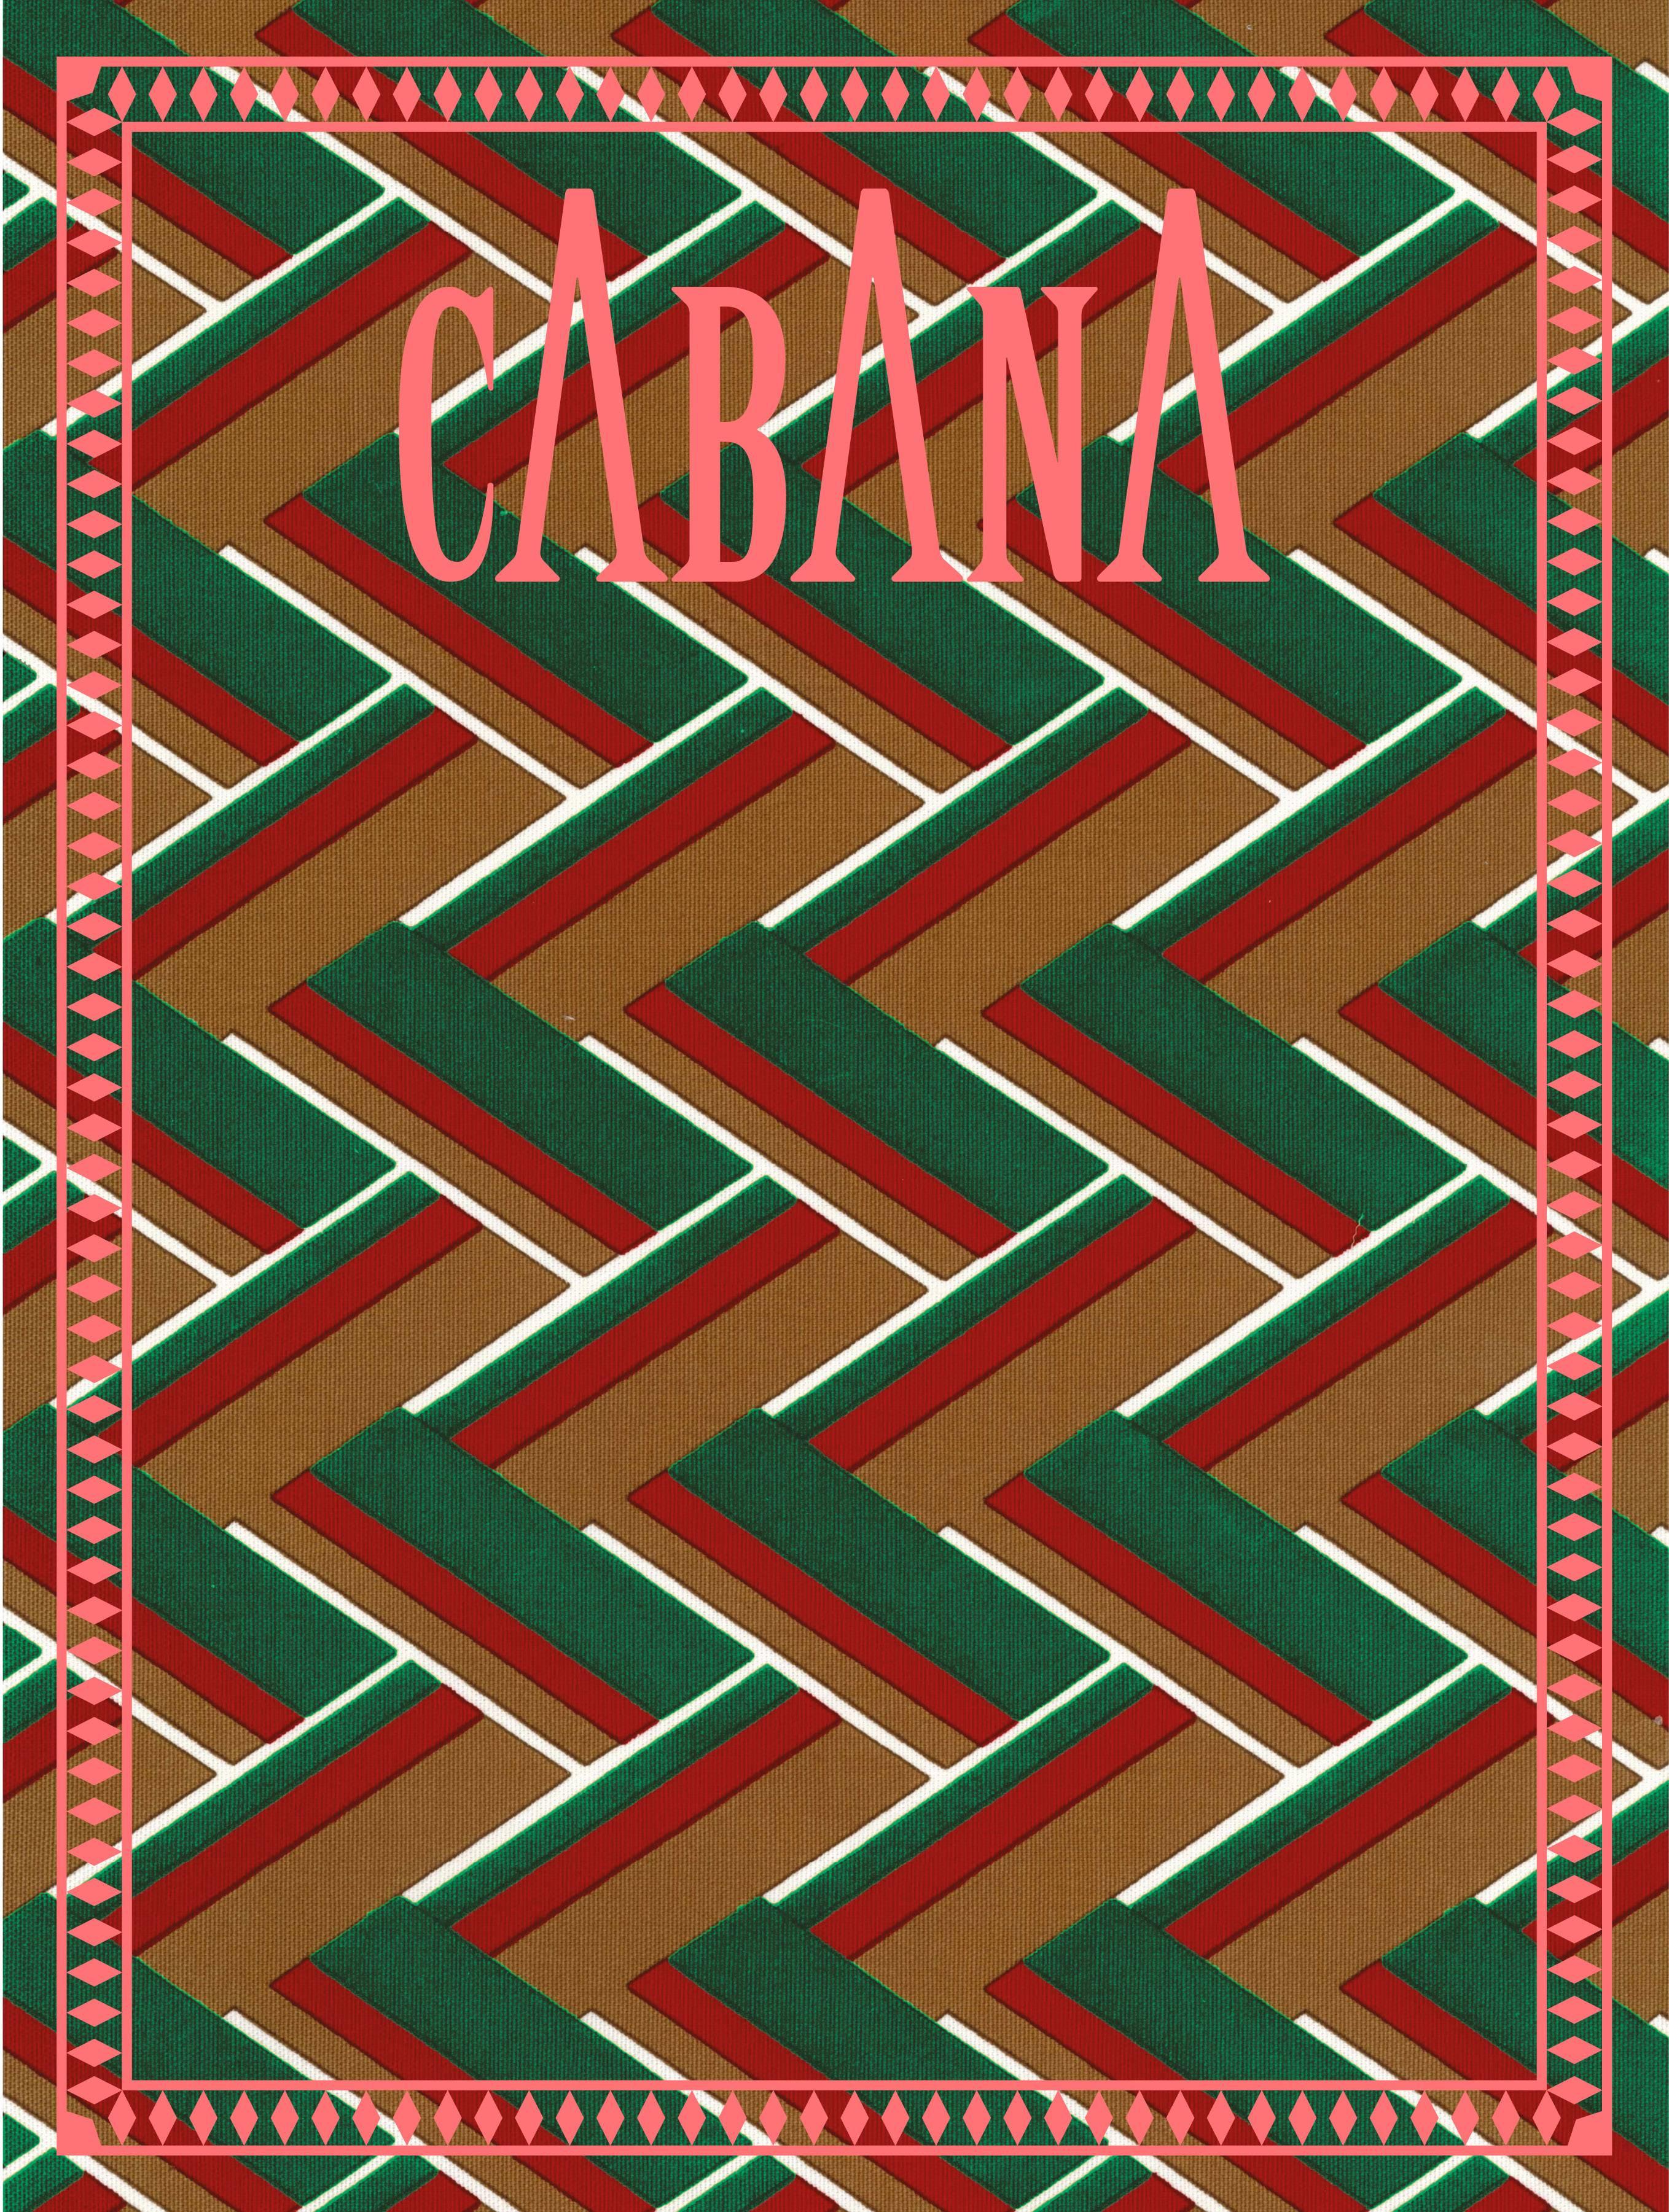 This is the latest Cabana magazine to be released. It comes in three different cover fabrics, all by Gucci.

Issue 5, Spring Summer, 2016.